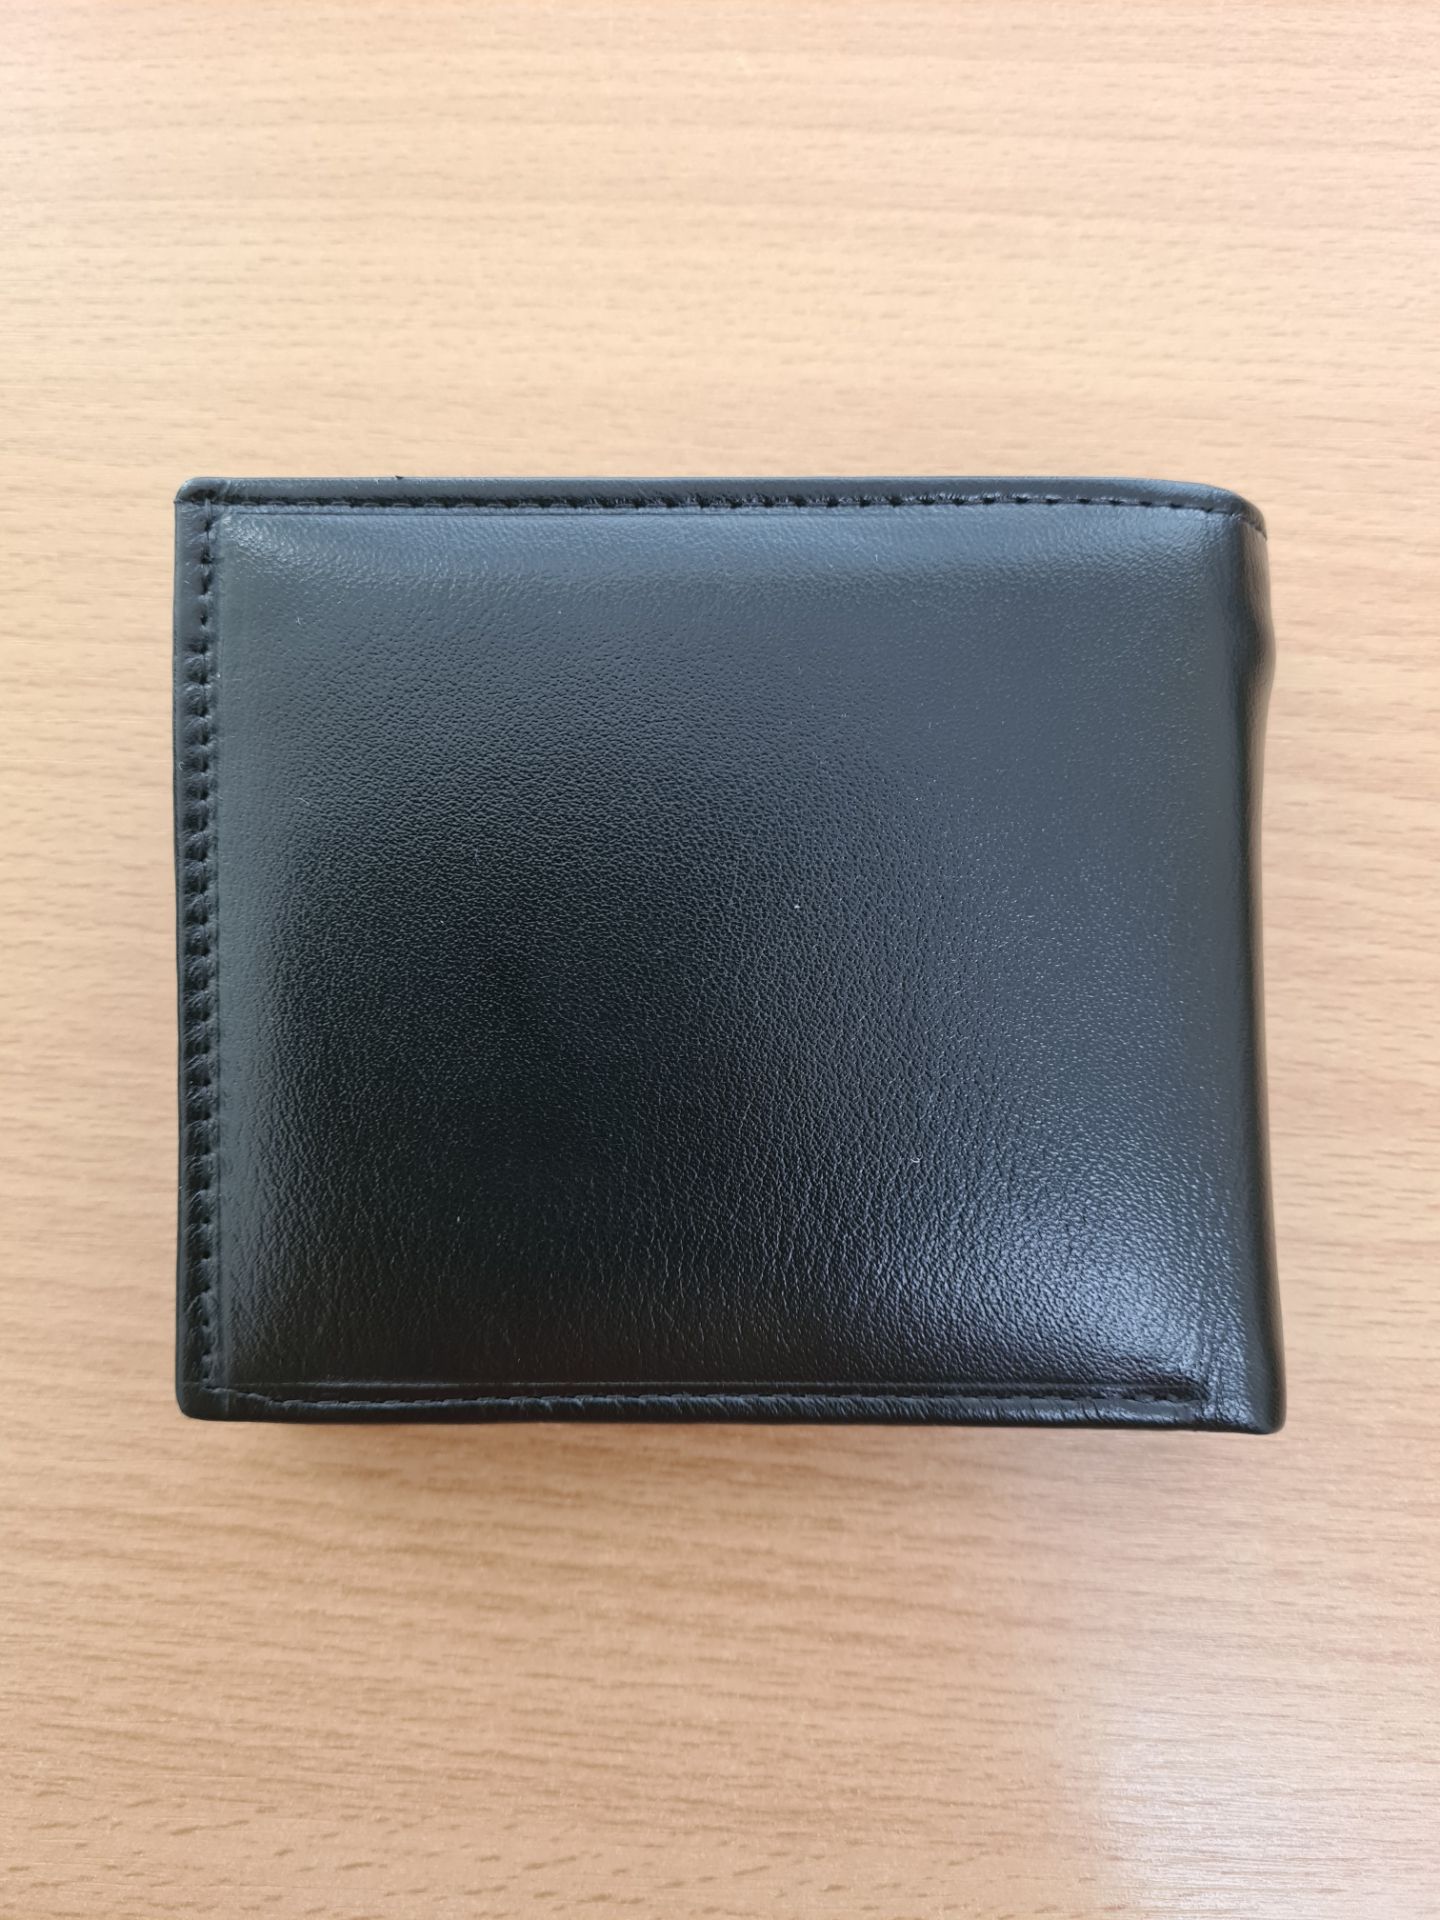 Emporio Armani Men's Leather Wallet - New With Box - Image 2 of 8